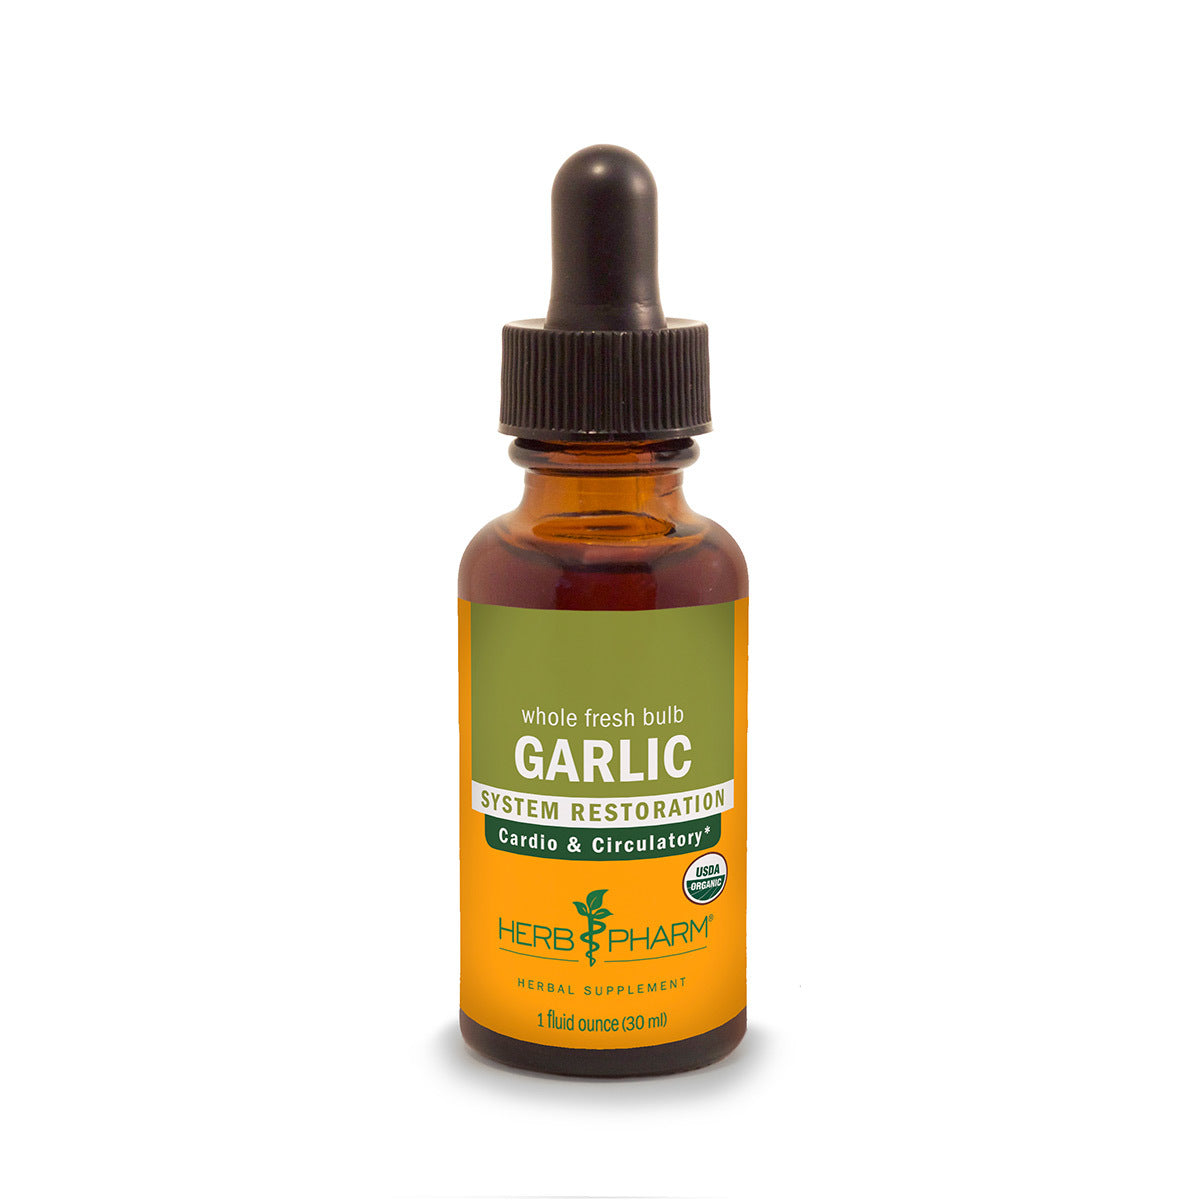 Primary image of Garlic Extract